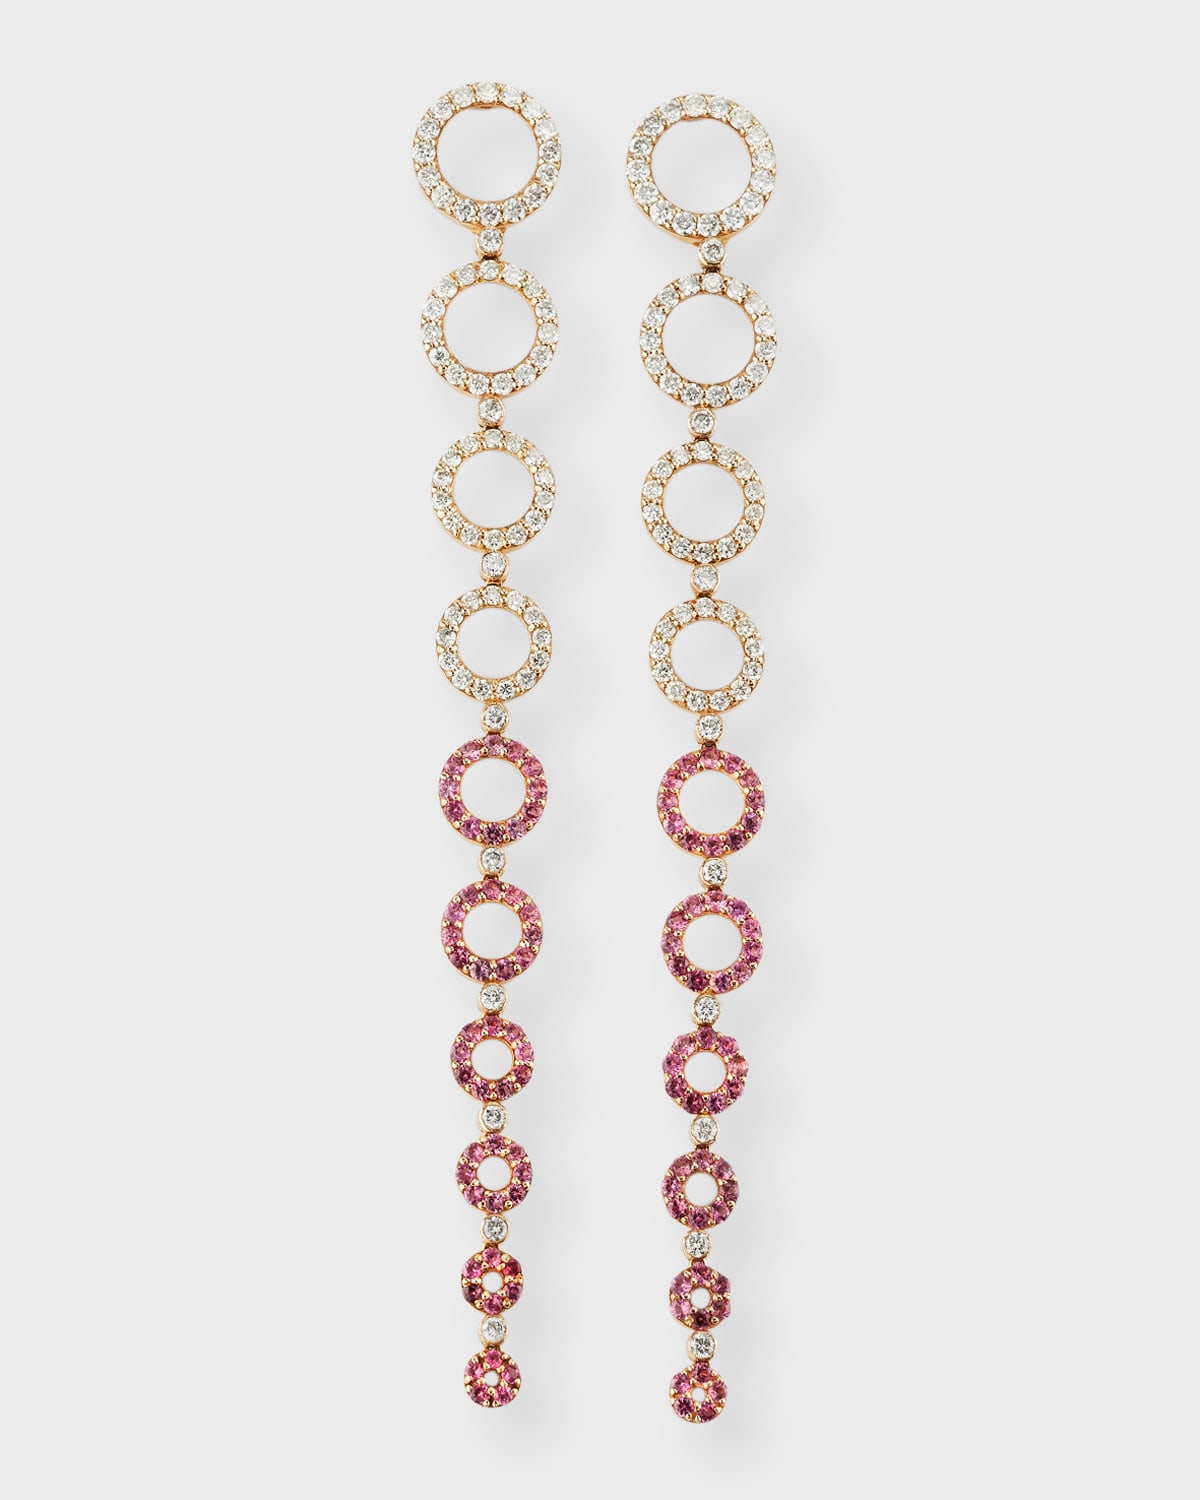 14K Yellow Gold Diamond and Pink Spinel Earrings